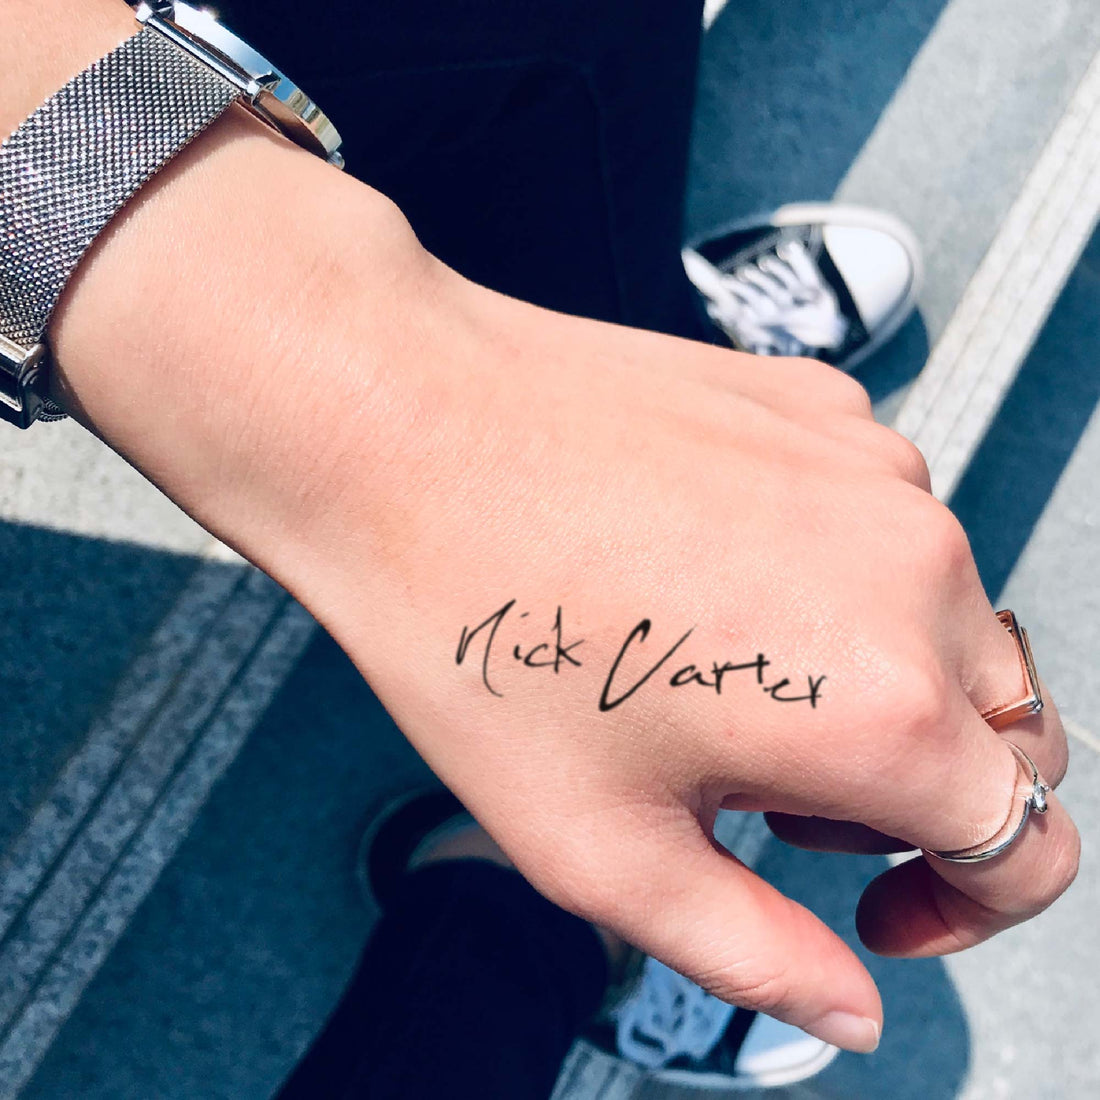 Nick Carter custom temporary tattoo sticker design idea inspiration meanings removal arm wrist hand words font name signature calligraphy lyrics tour concert outfits merch accessory gift souvenir costumes wear dress up code